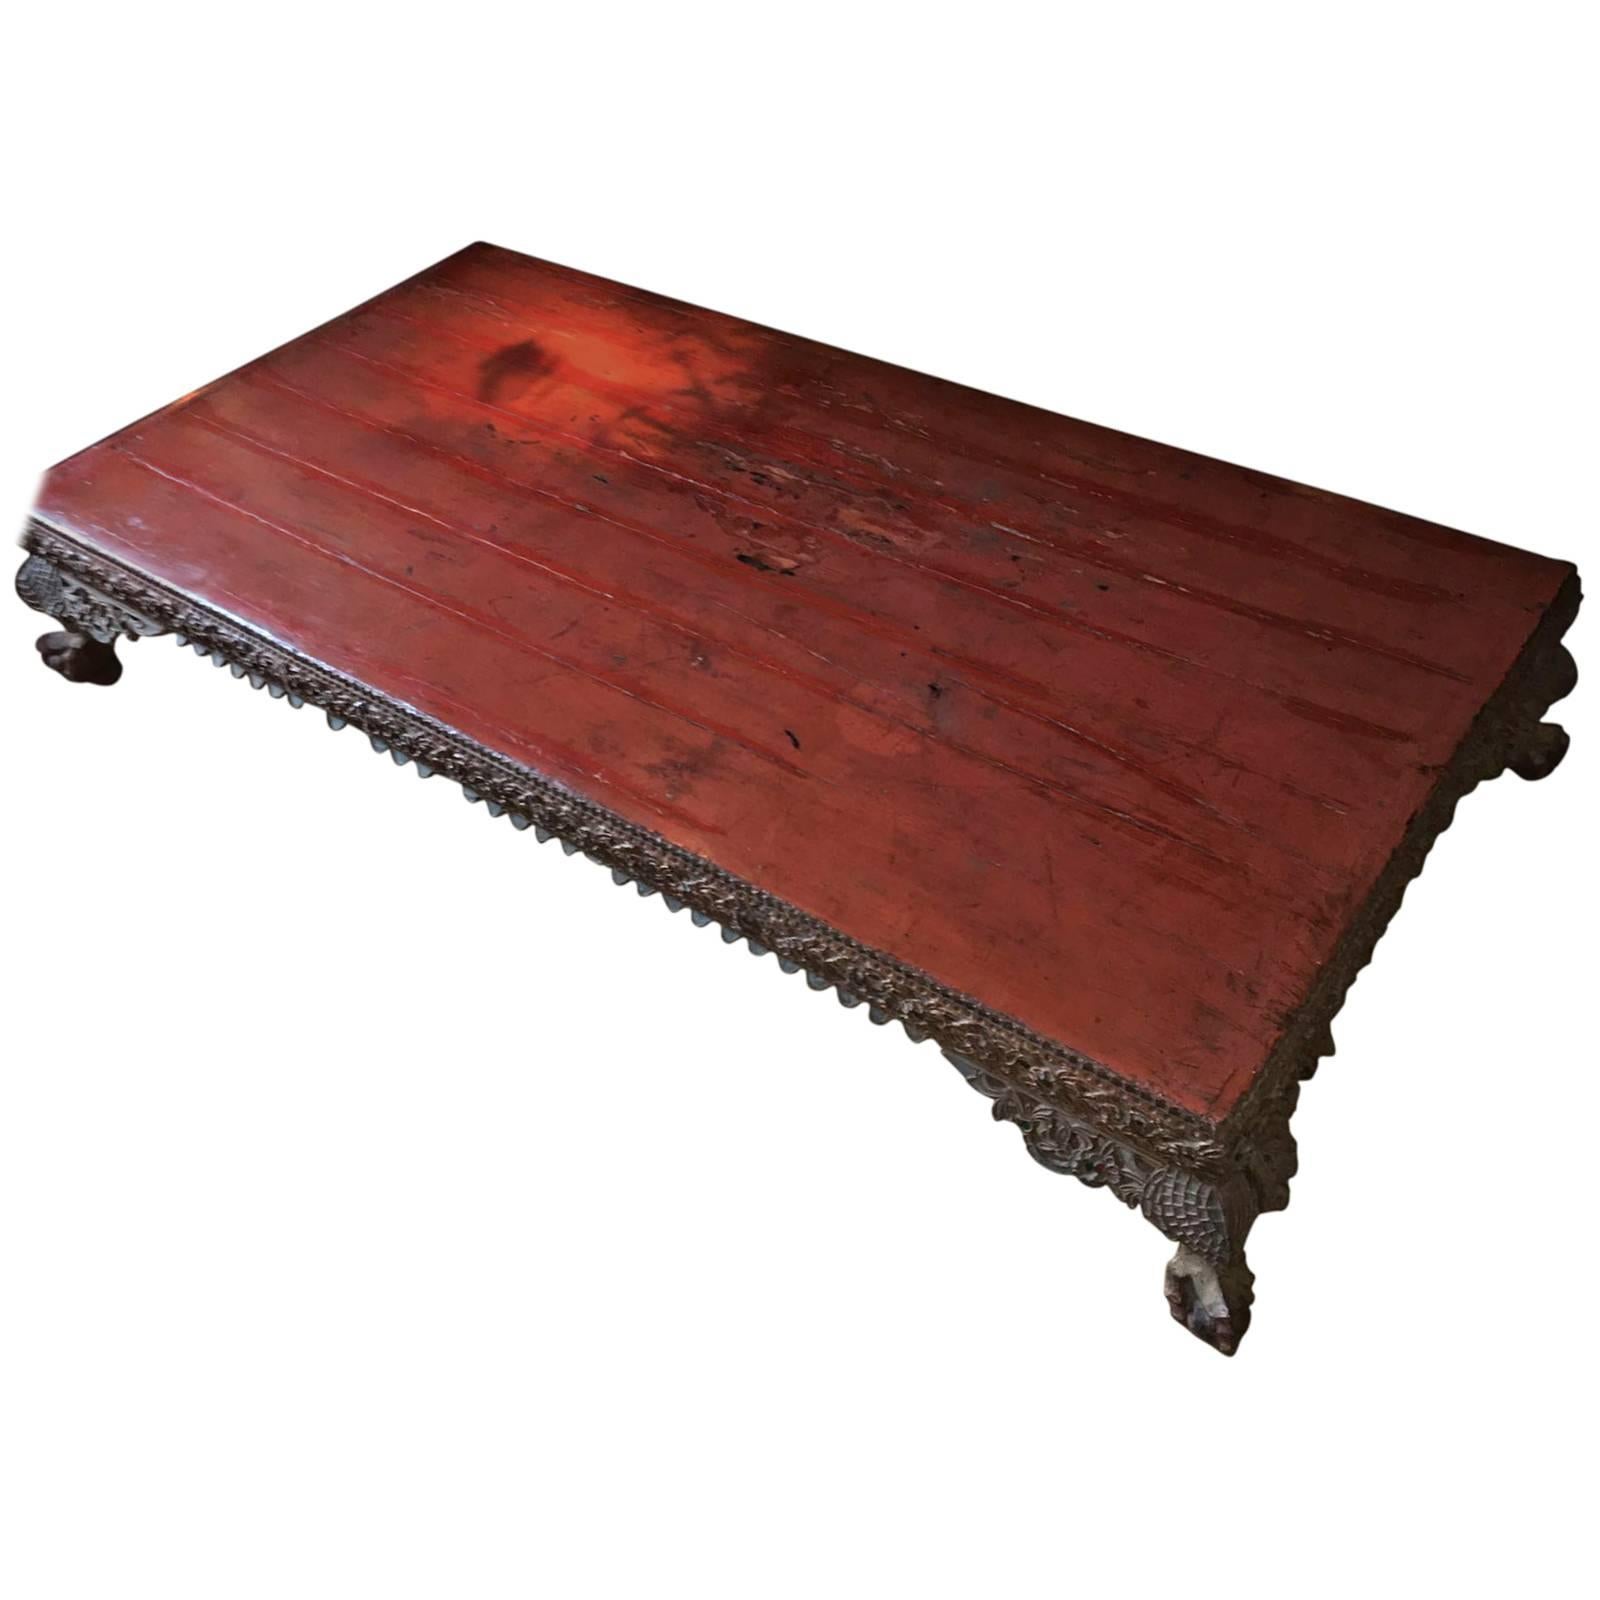 Exceptional Burmese low table in original red lacquer, Birma, 18th century
Finished with glass and gilded decorations,
great to be used as a coffee table in an vintage interior as well as in a classical setting.

 